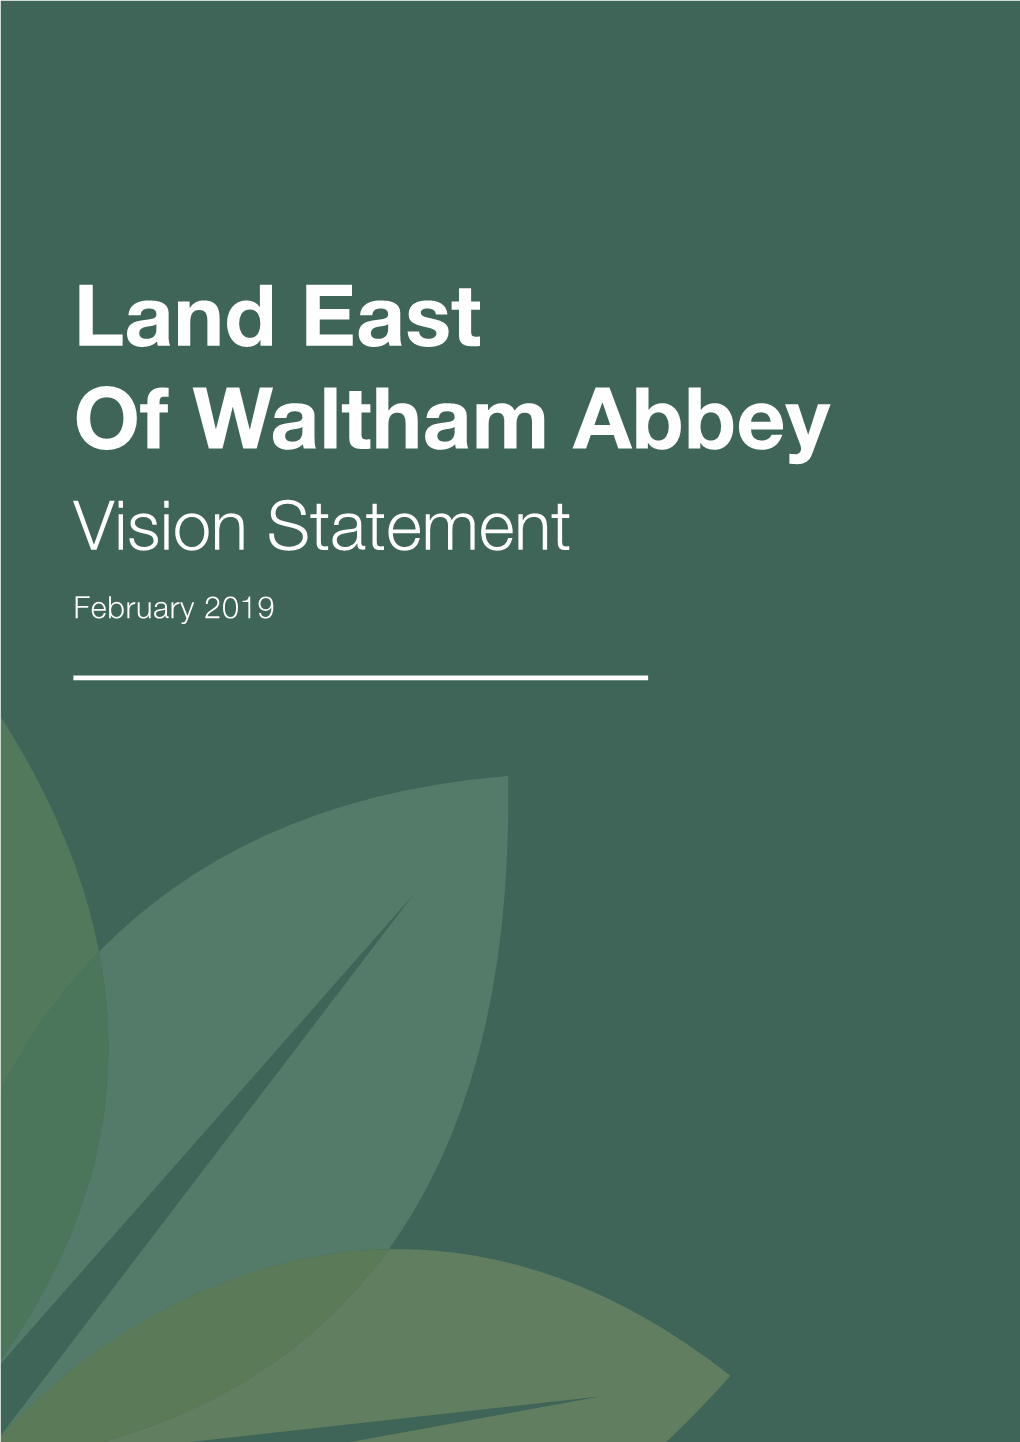 Land East of Waltham Abbey Vision Statement February 2019 Contents